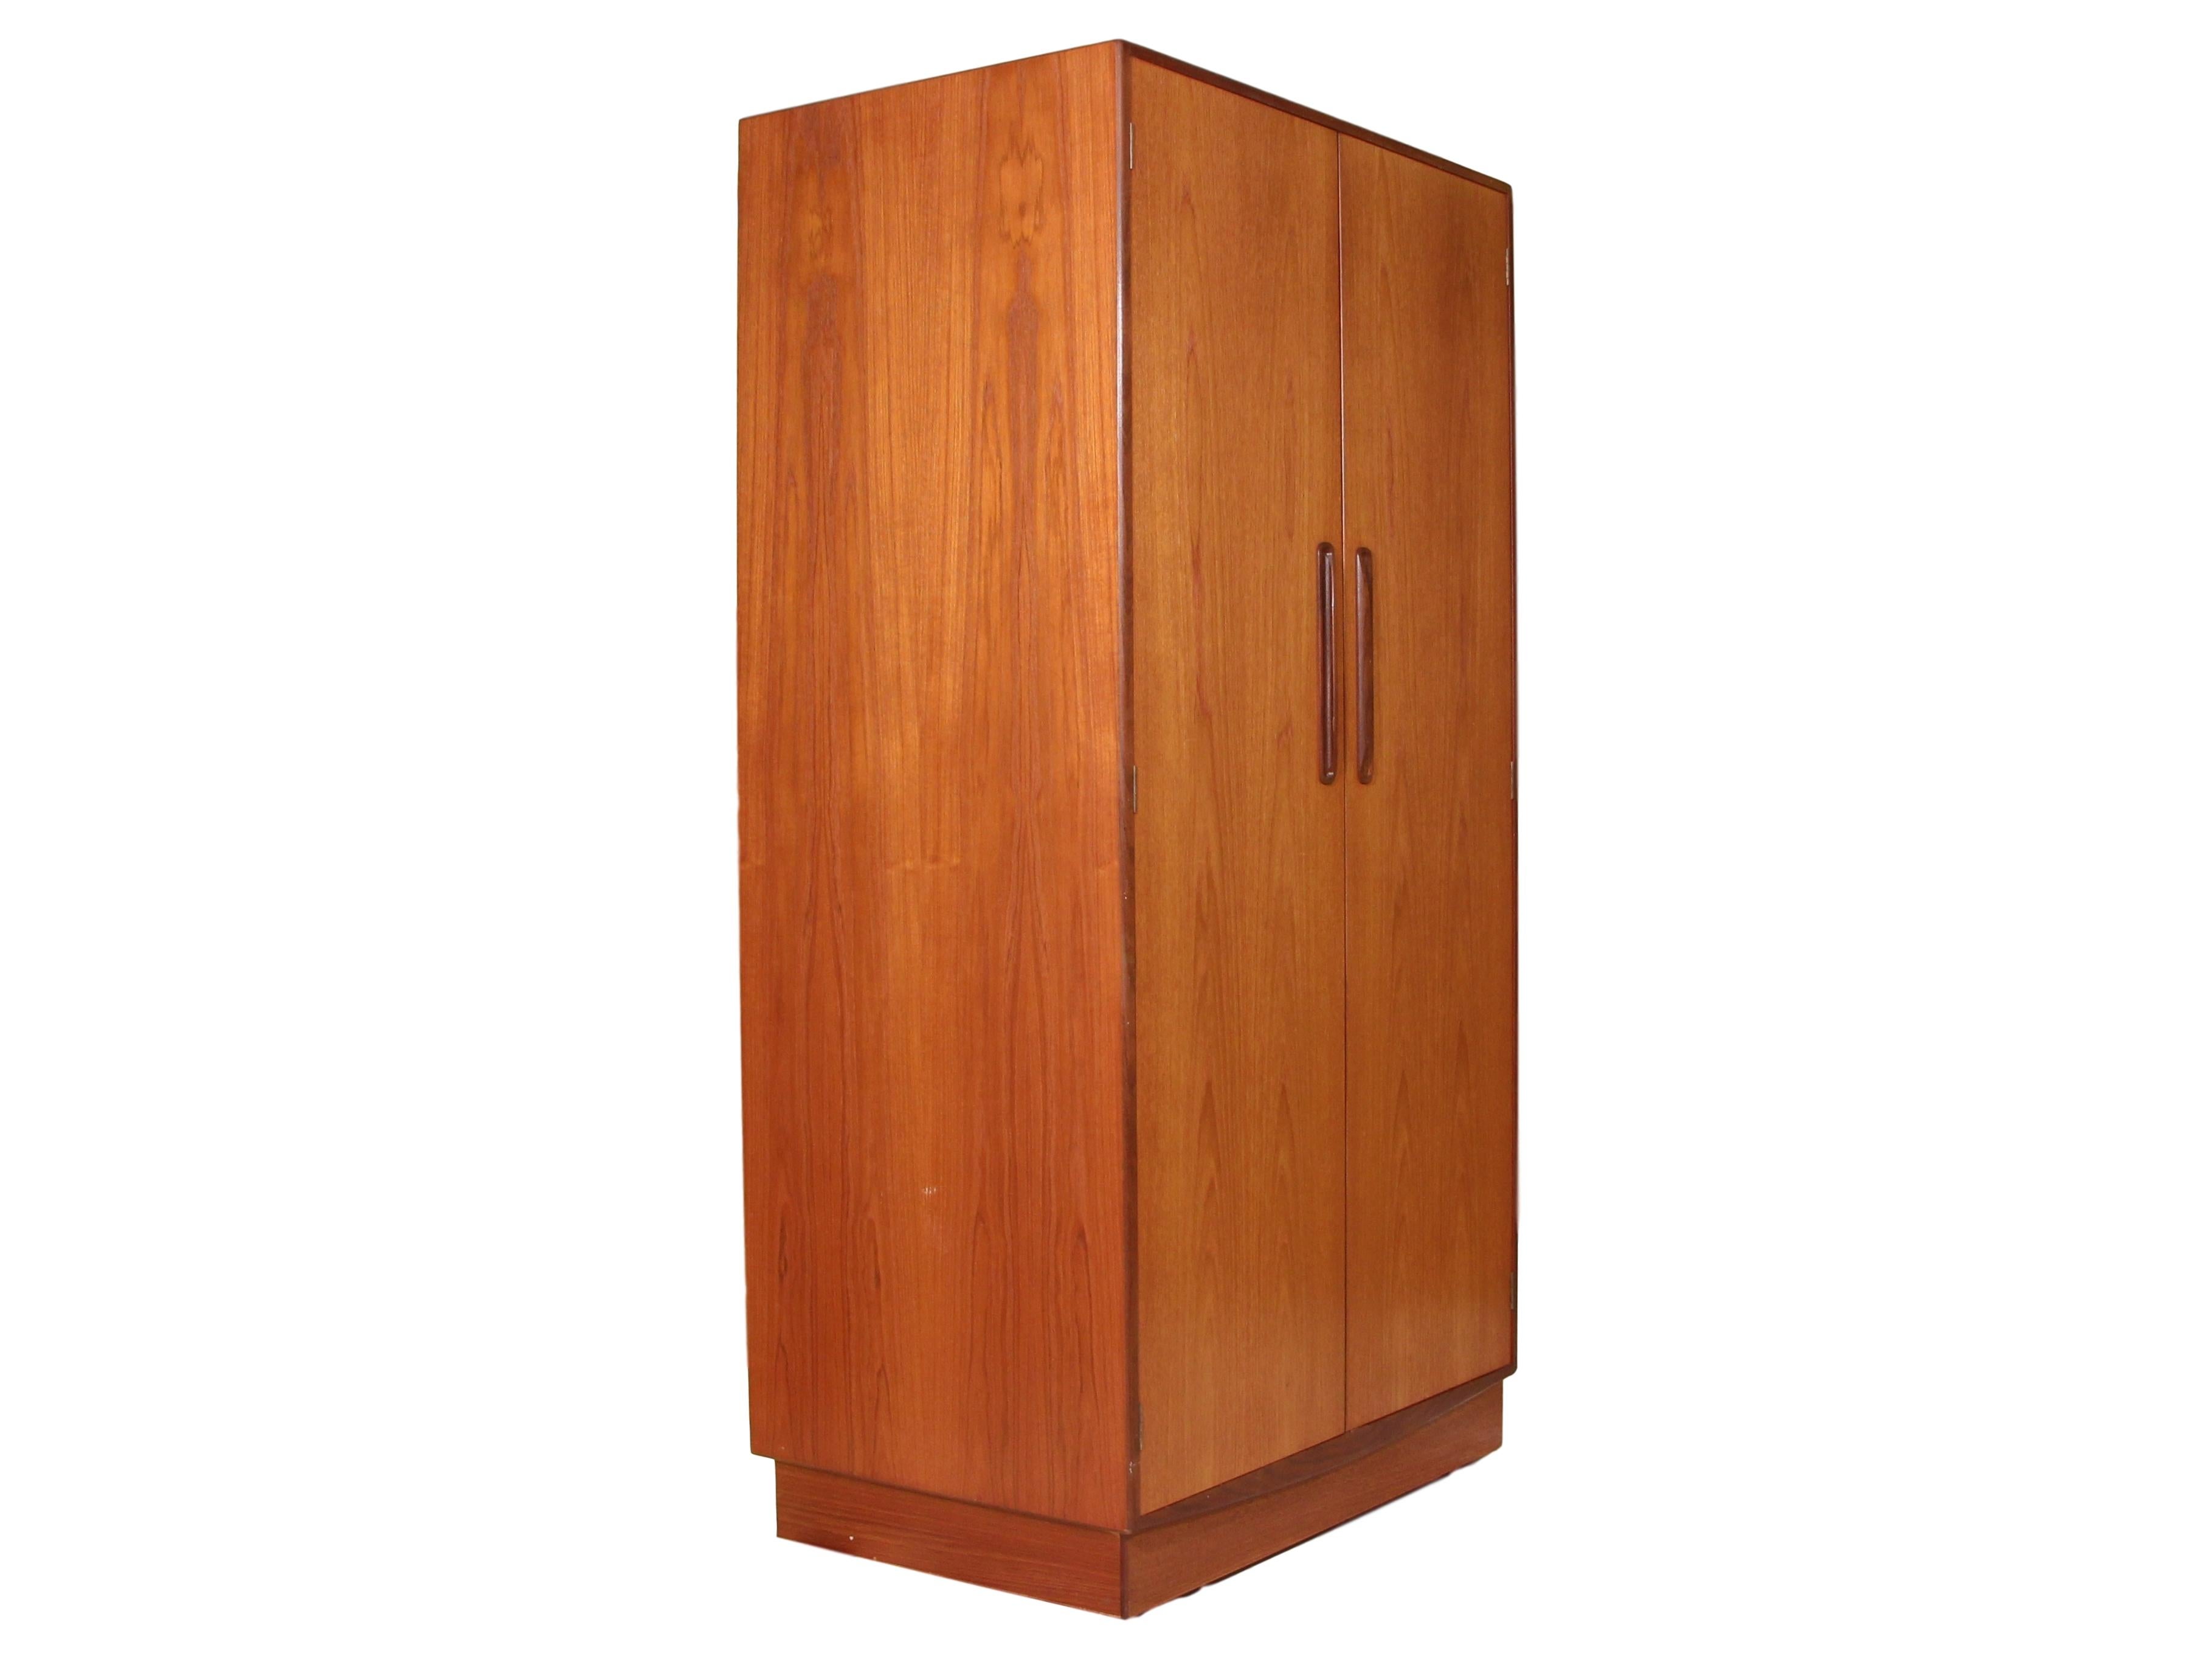 Amazing teak wardrobe by G Plan. Designed in the 1960s by Victor Bramwell Wilkins for G Plan's Fresco Range. Danish Modern in style. Two-door wardrobe with half hanging space on the left side and shelves and drawer space on the right. Stunning grain